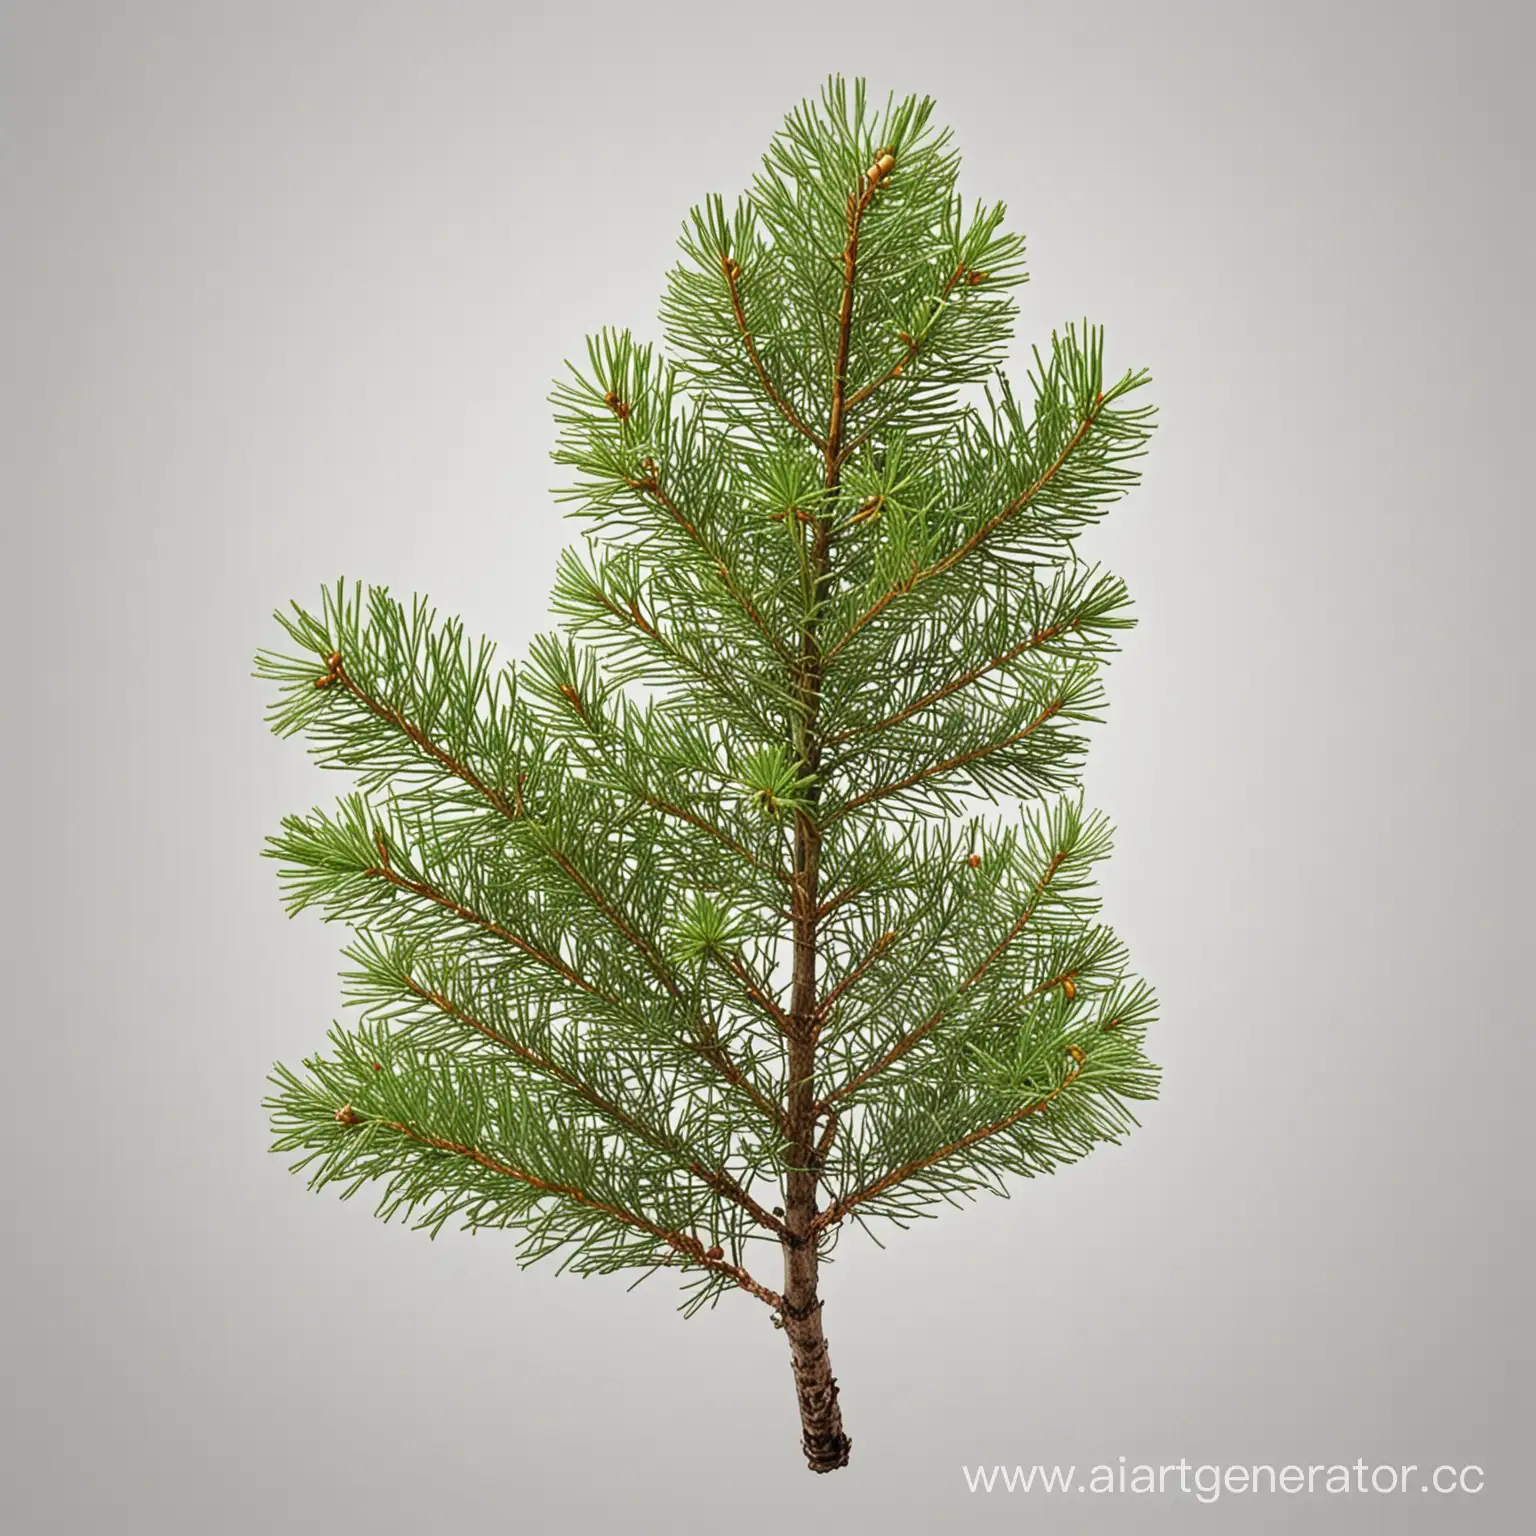 Large-Fir-Branch-on-White-Background-Vibrant-Evergreen-Foliage-Against-Clean-Canvas